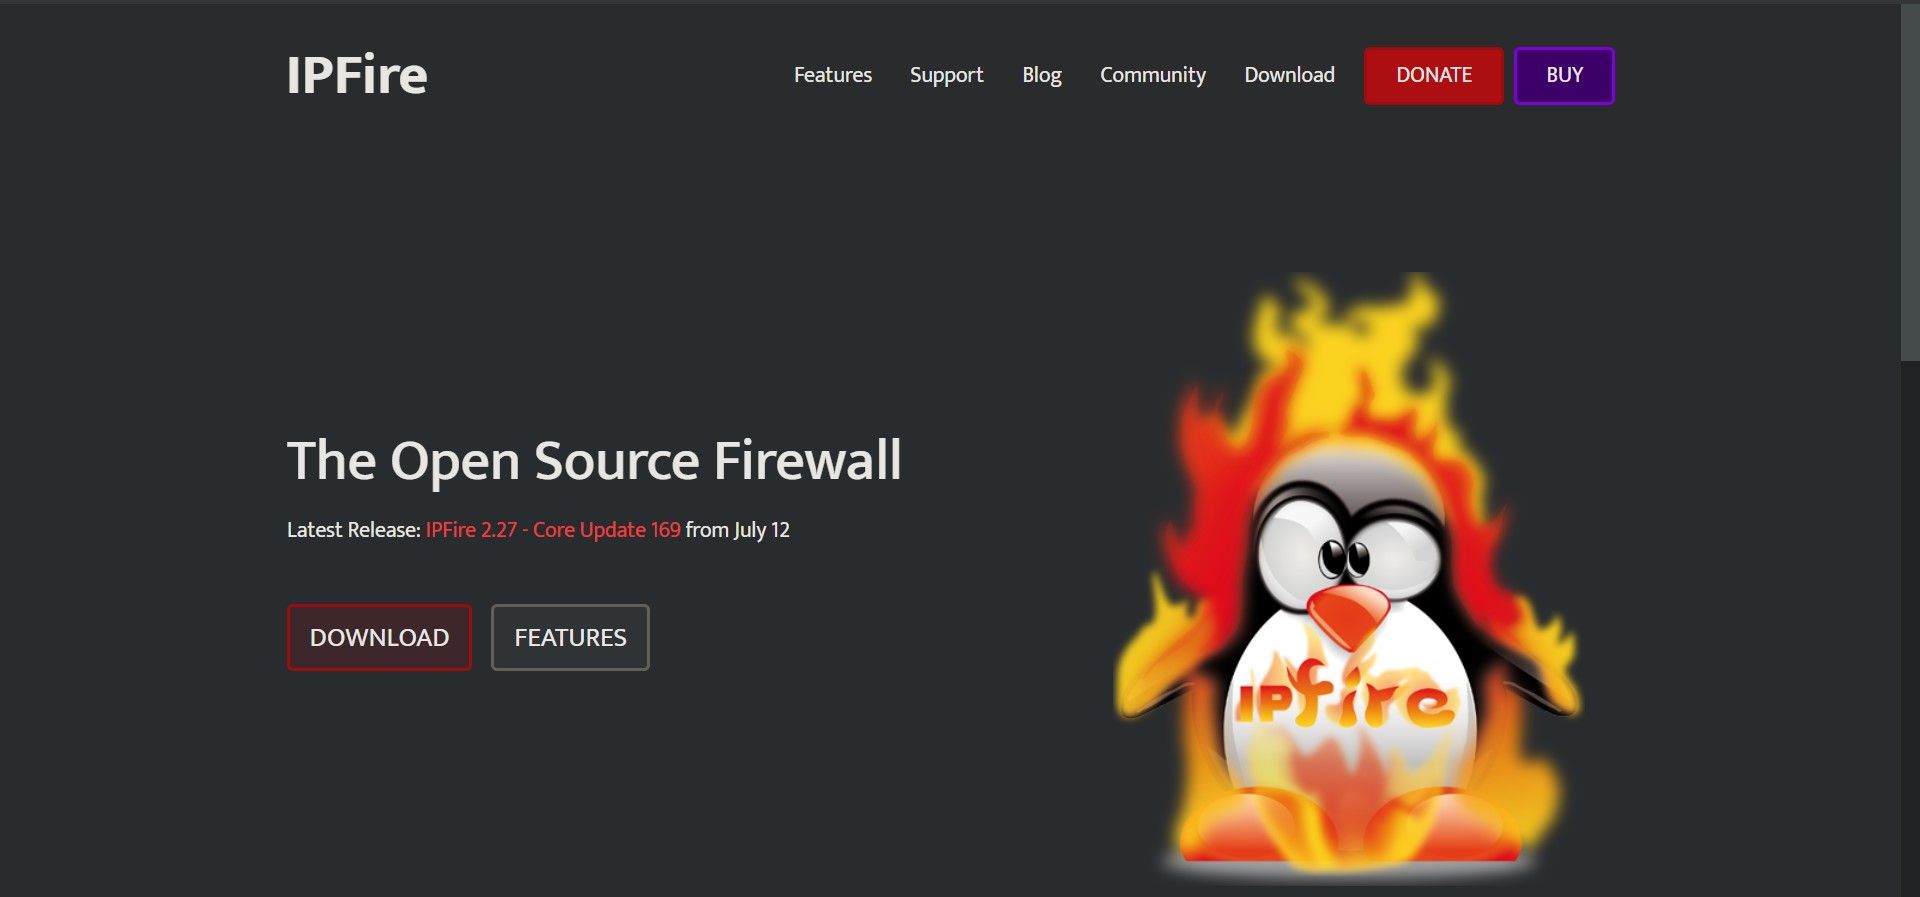 The Home Page Of The Ipfire Website